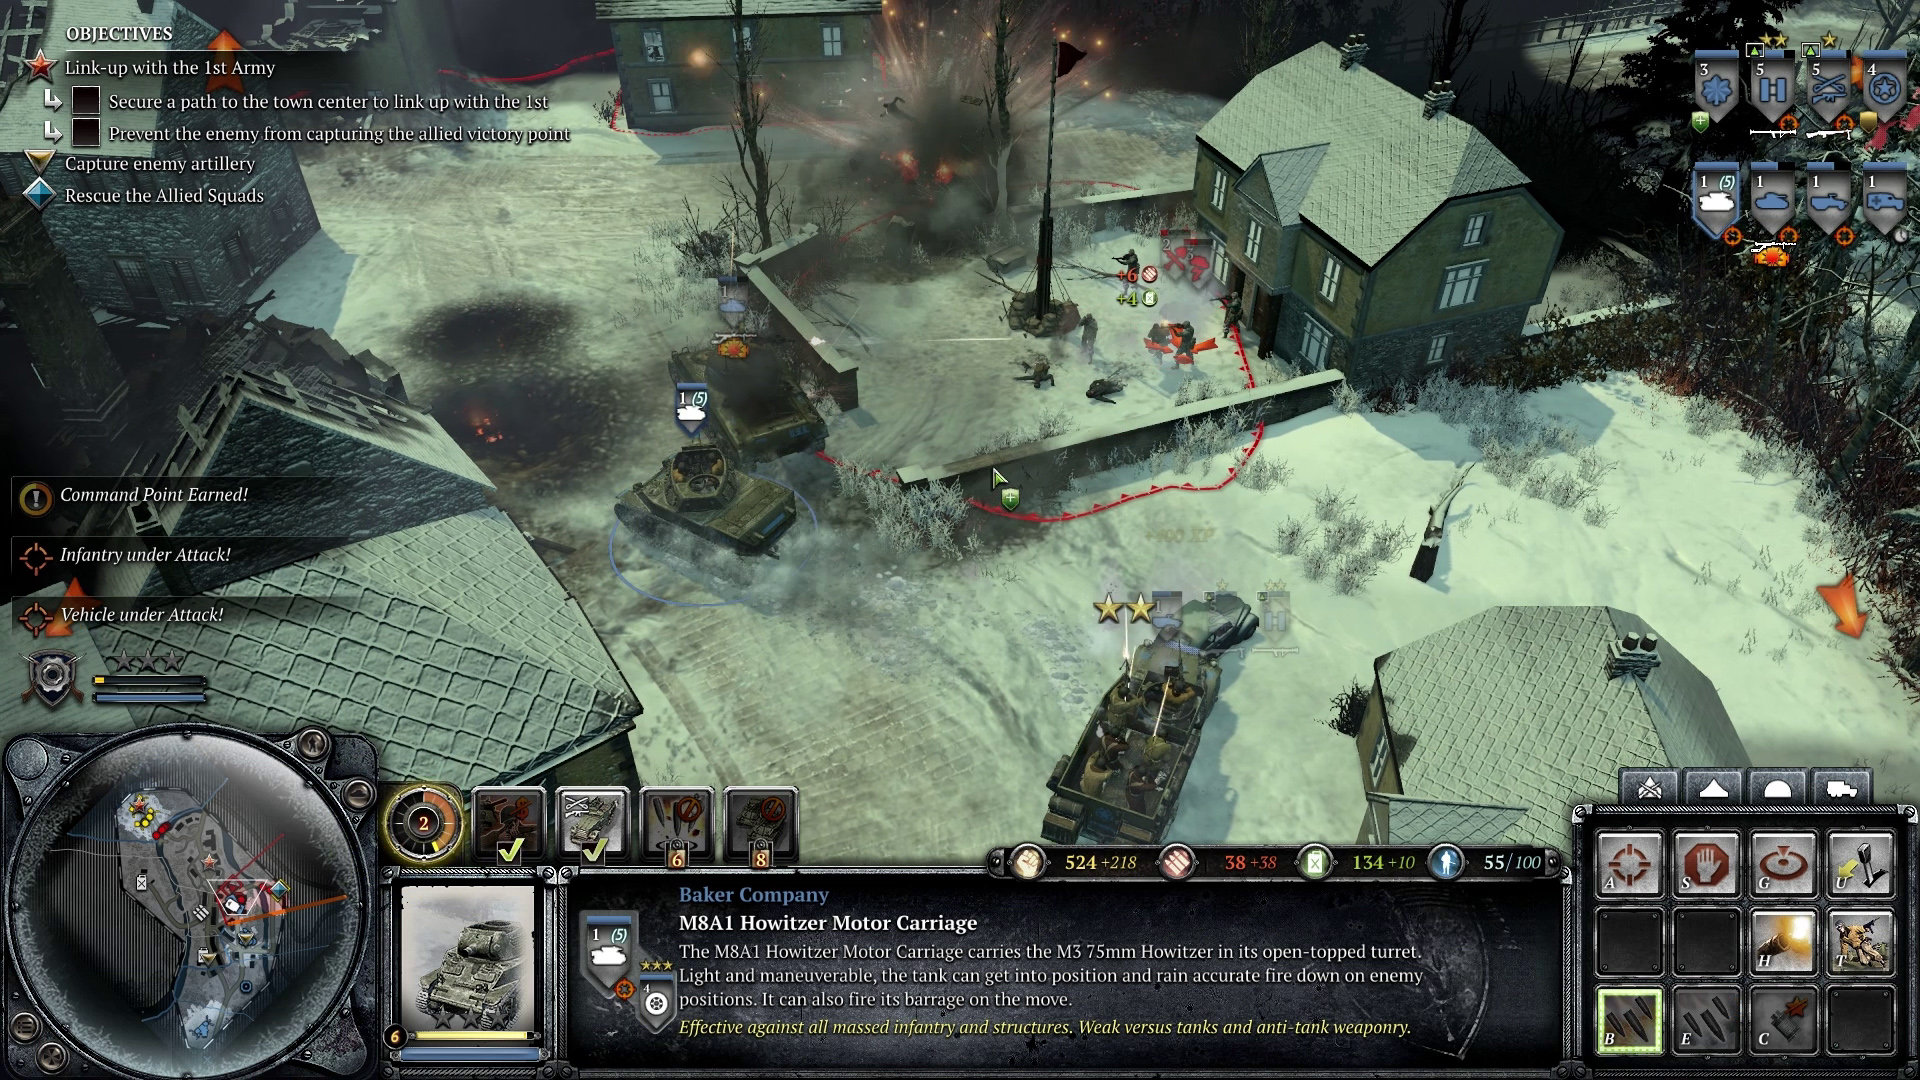 Introducing Company Of Heroes 2 For Mac